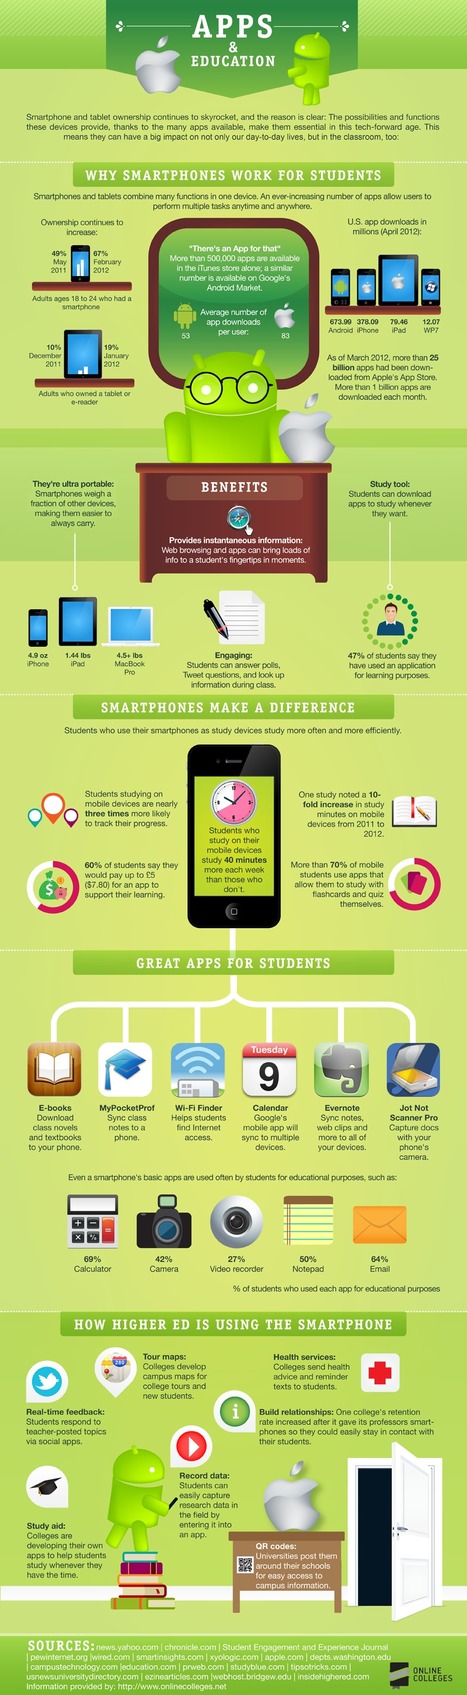 An Infographic for Mobile Learning | Digital Delights - Digital Tribes | Scoop.it